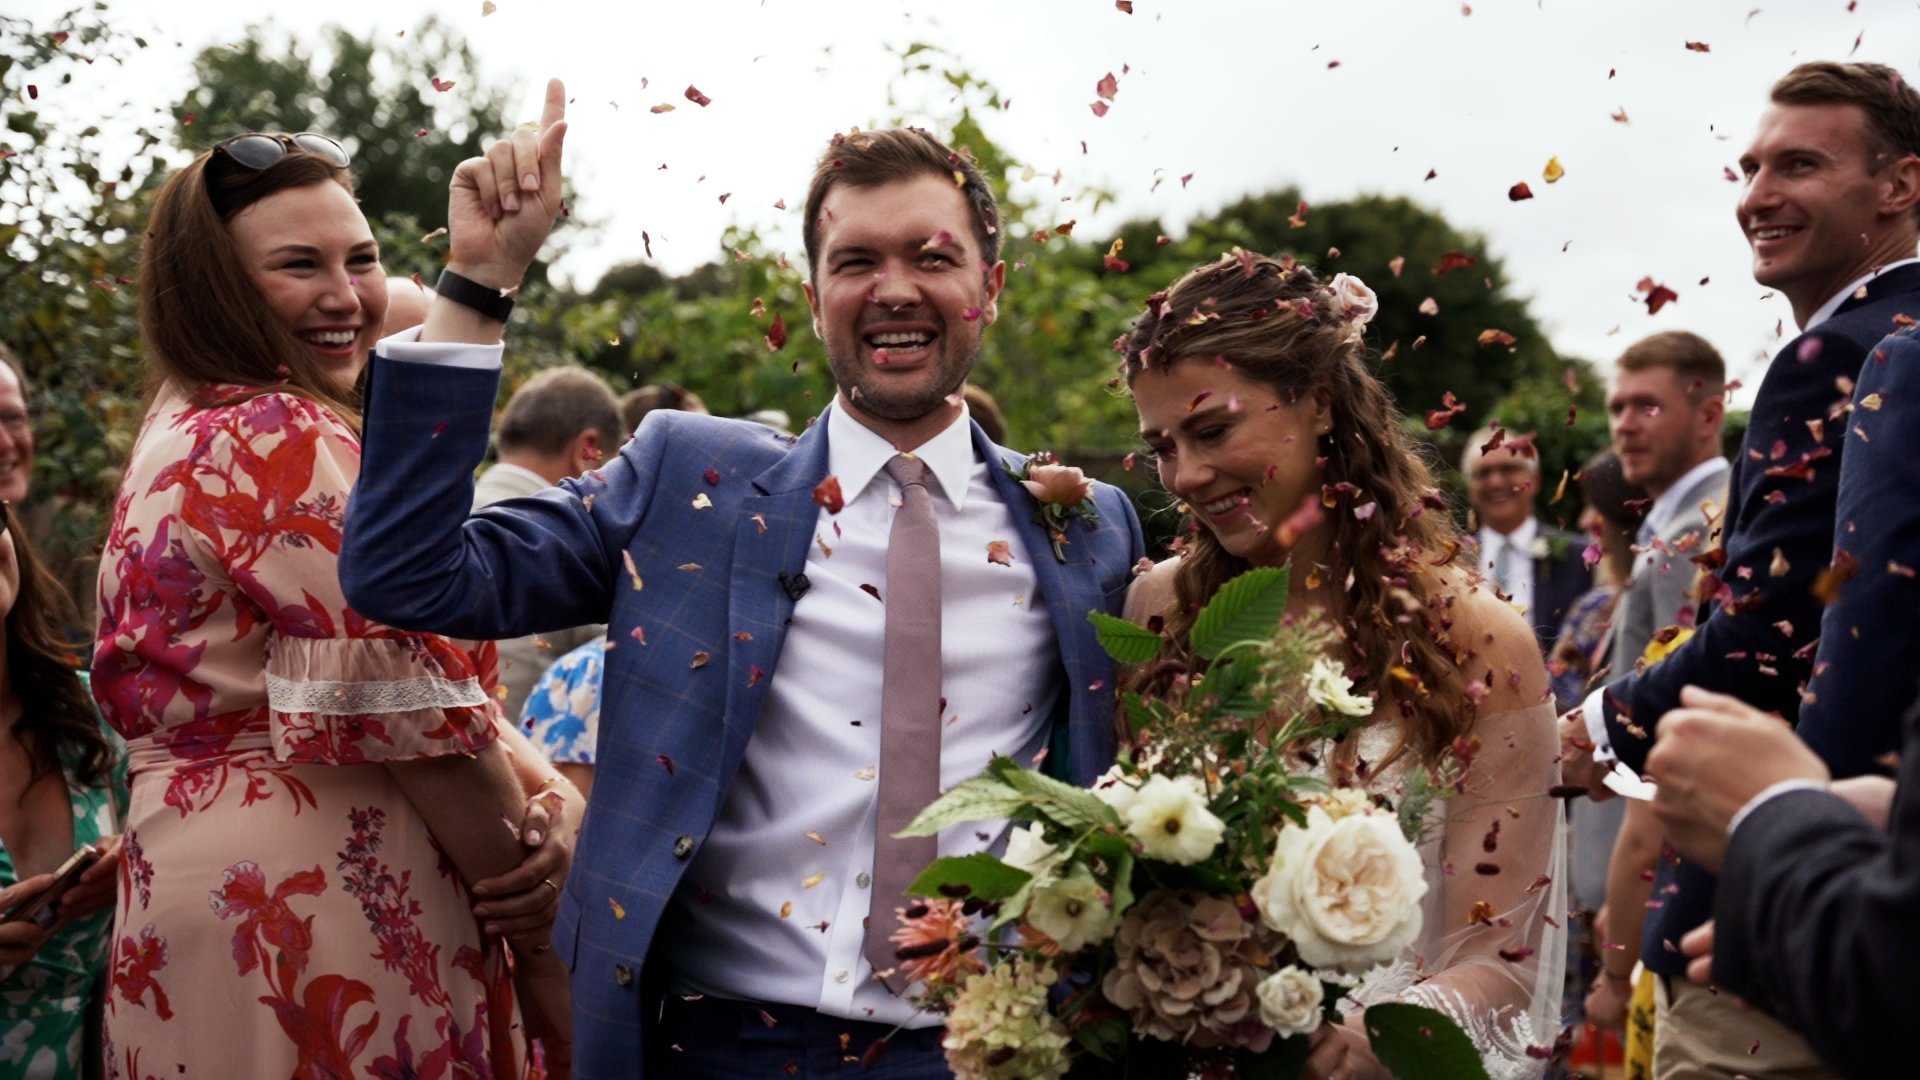 Bride and groom walking up the aisle at outdoor wedding while guests throw confetti